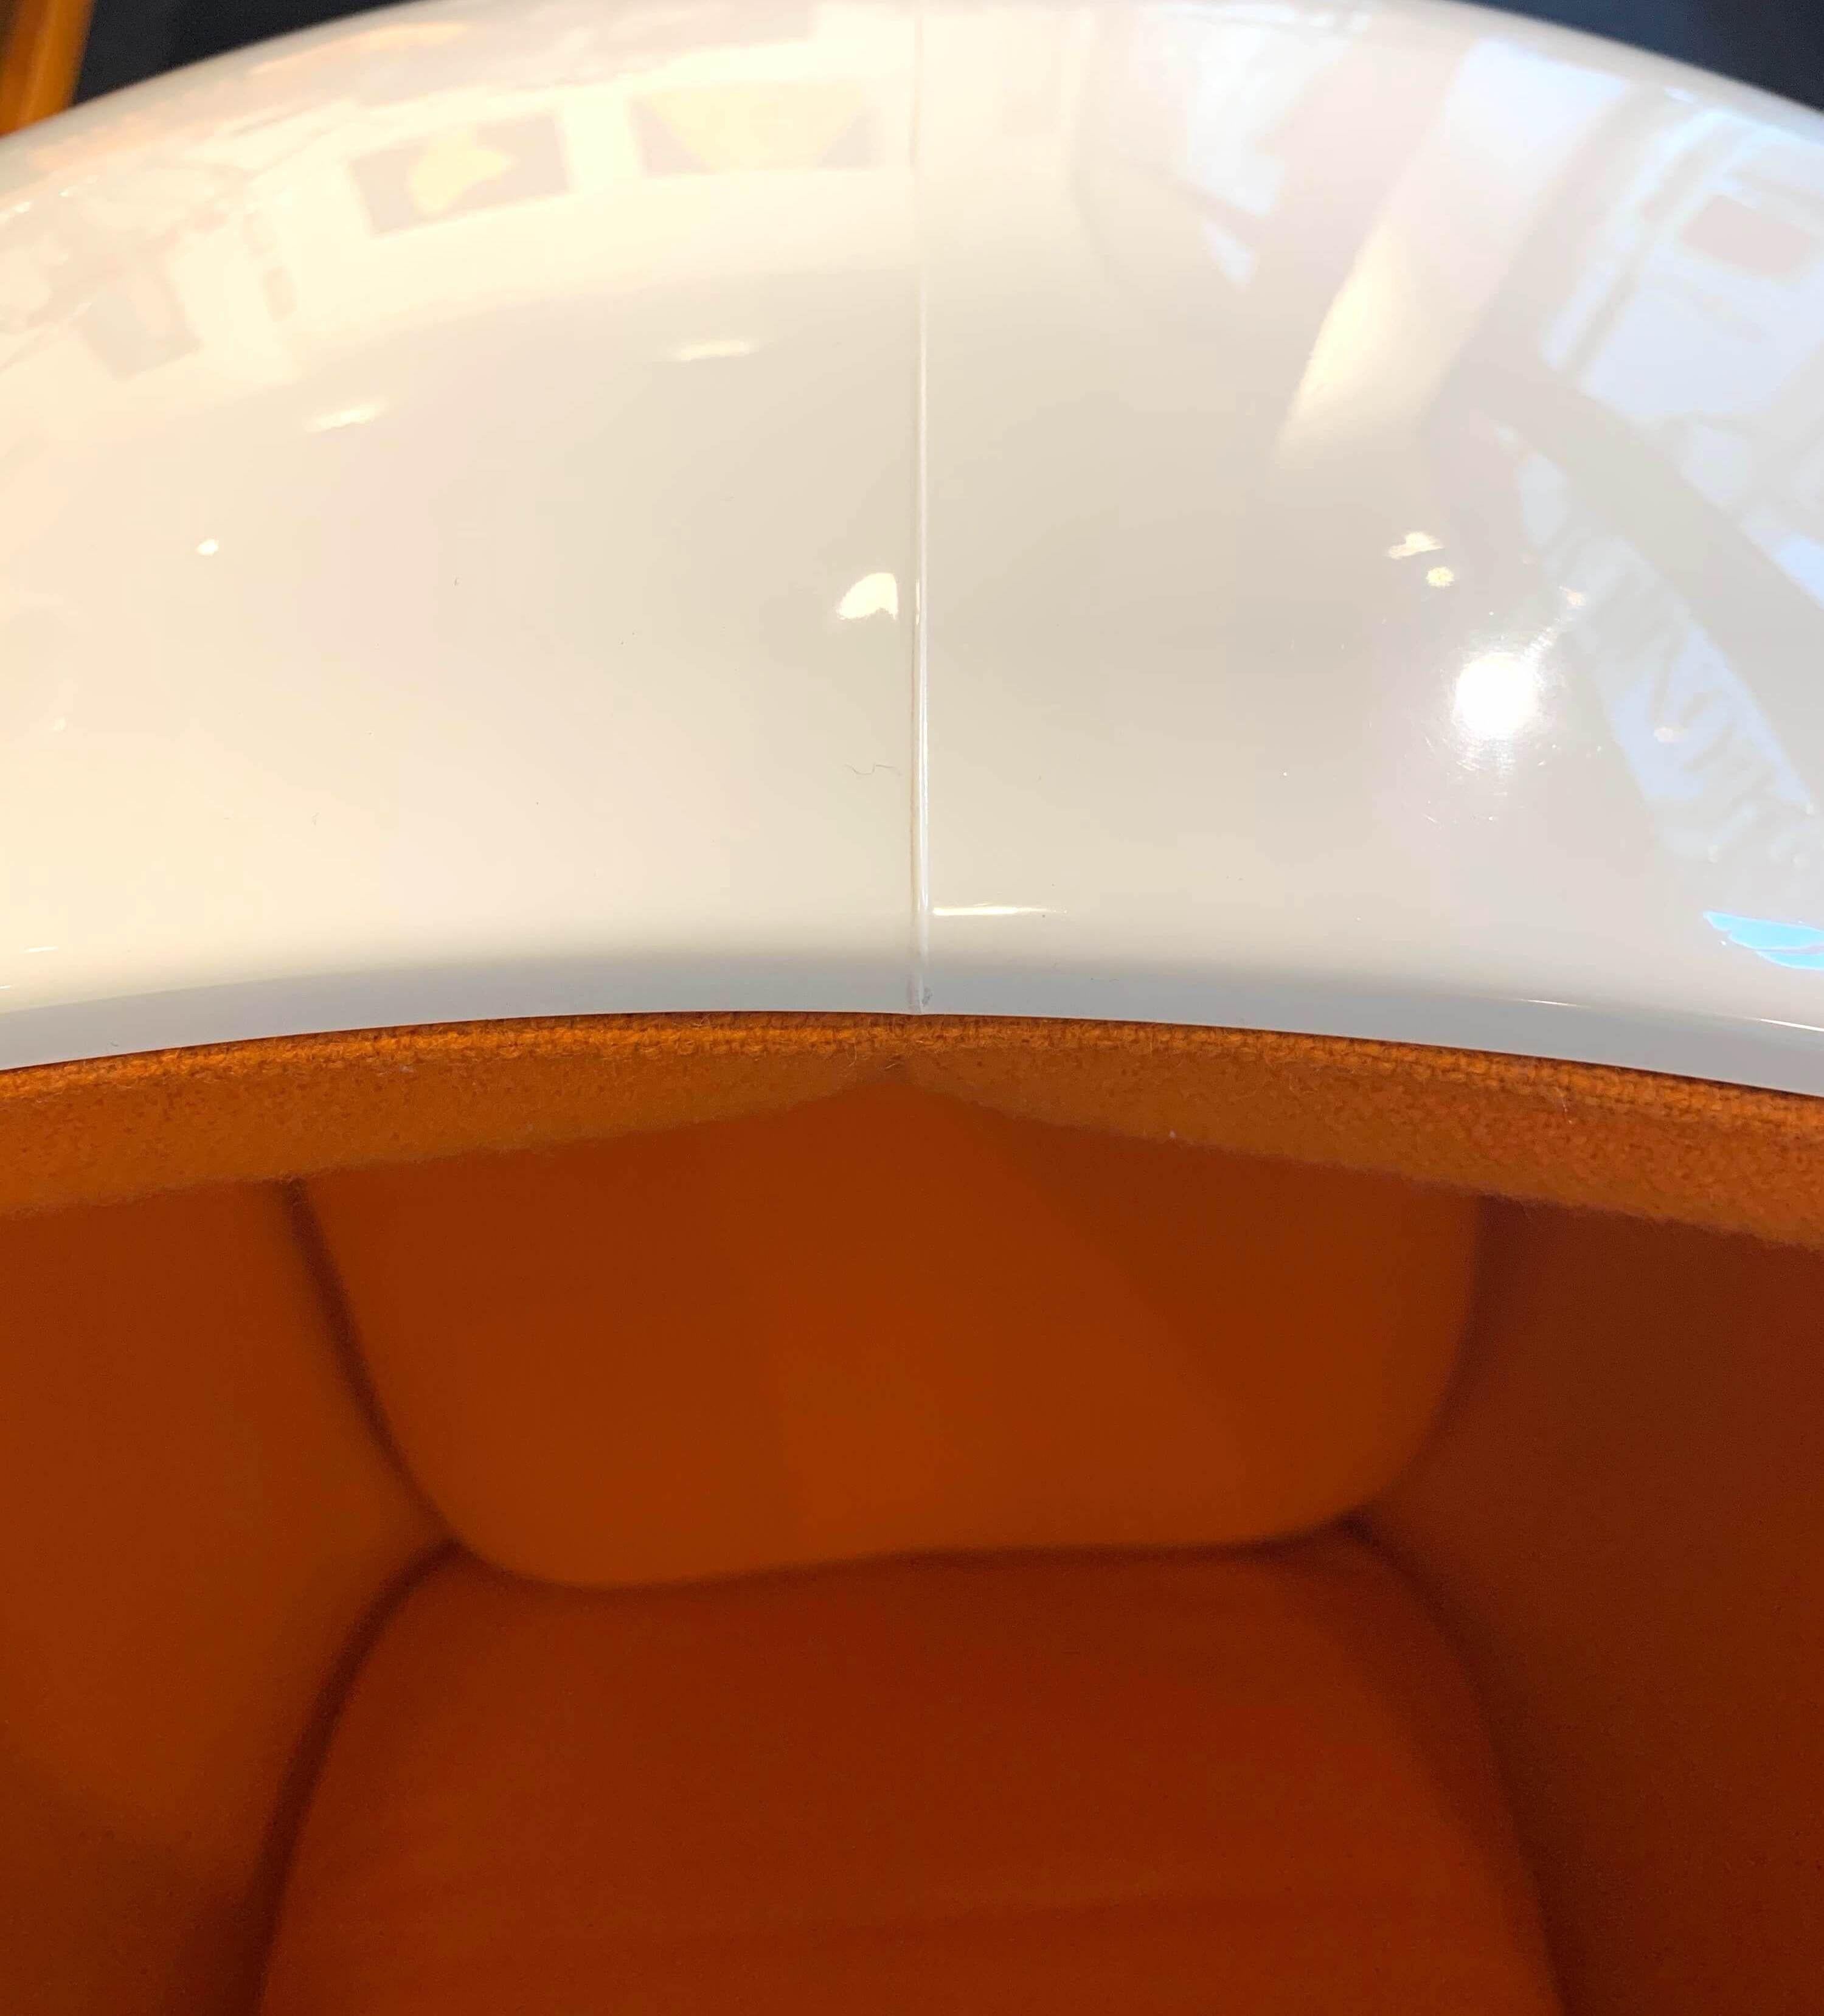 Ball Chair by Eero Aarnio, Orange and White, Adelta, Finland circa 1980/90s 1